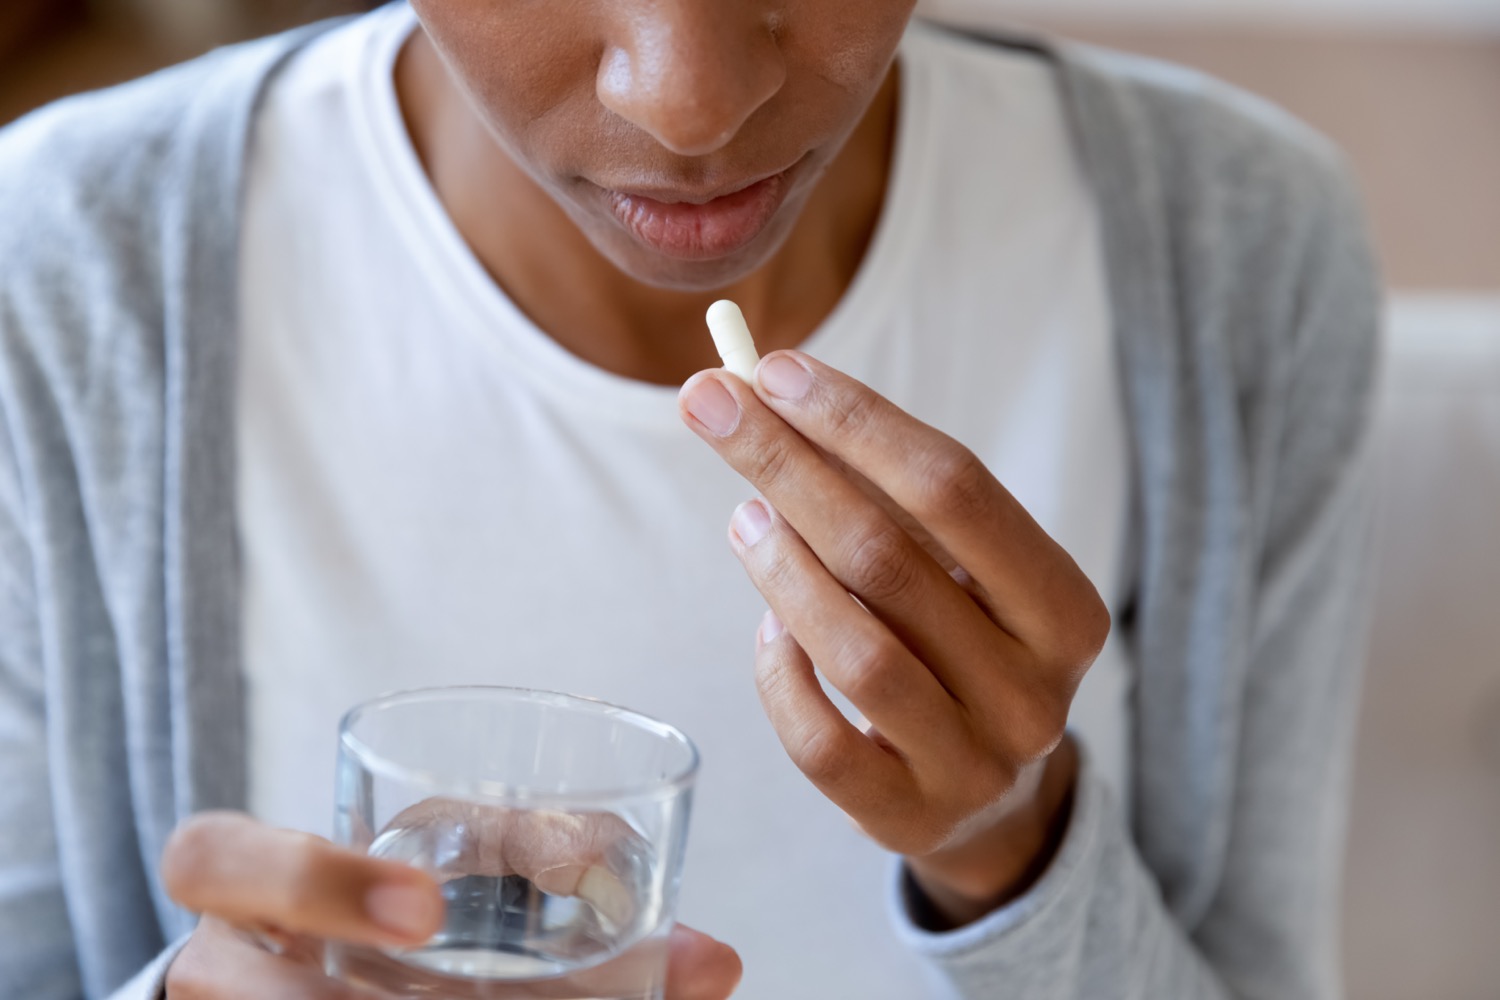 a black woman about to take a pill, holding a glass of water in the other hand